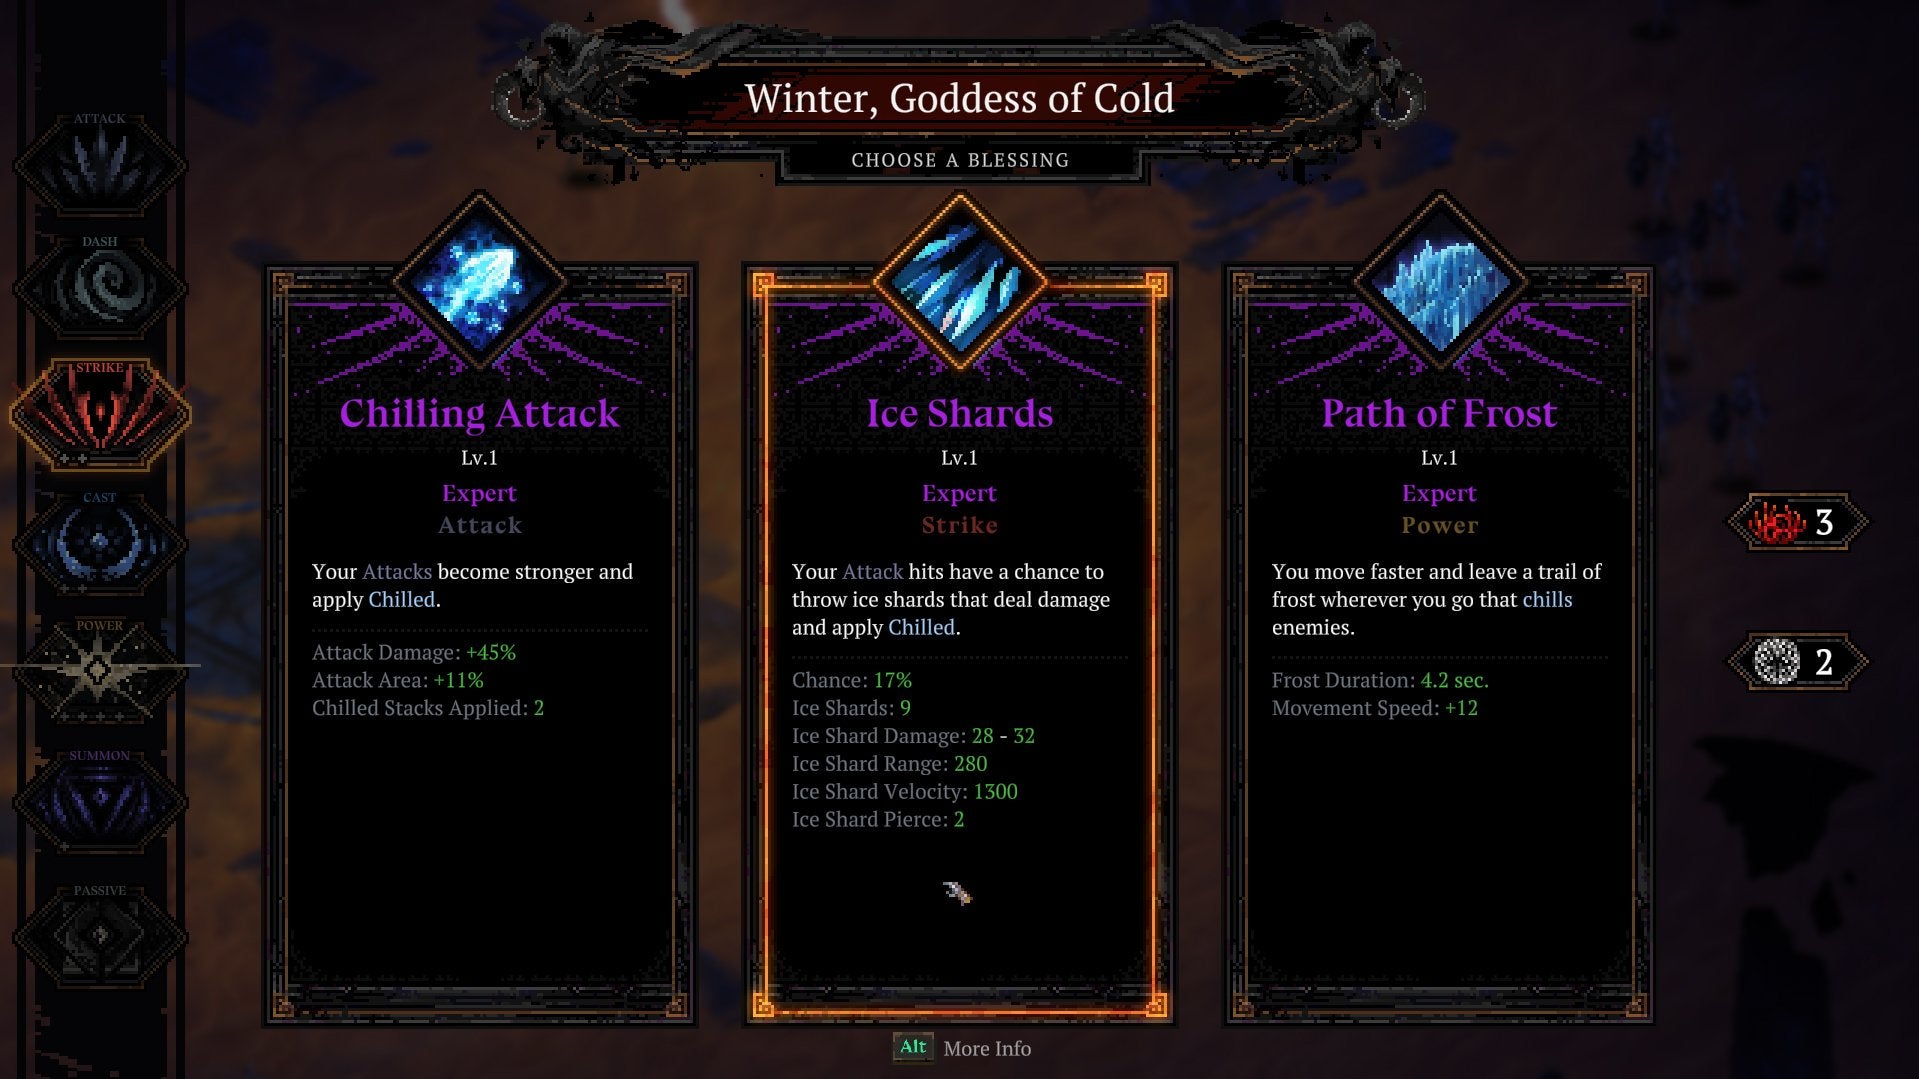 The player given three options for god blessings from Winter, Goddess of Cold.